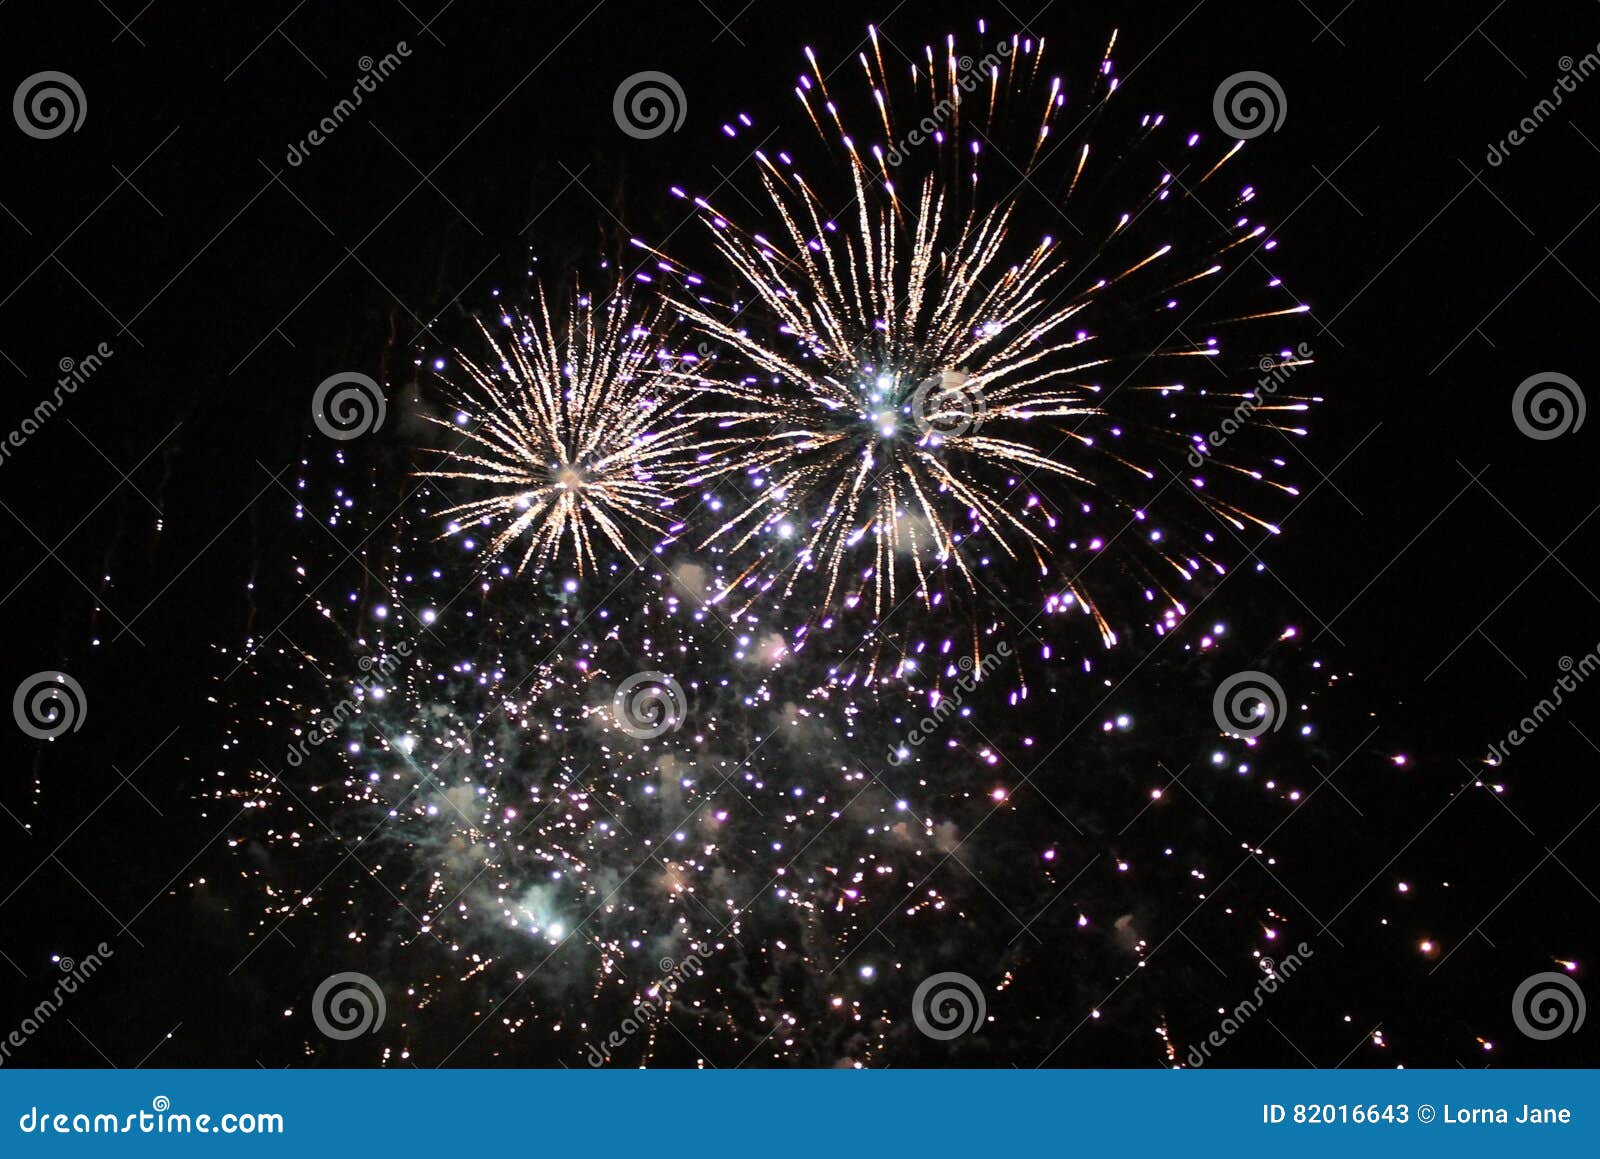 Fireworks Light Up The Sky With Dazzling Display Stock Image Image Of